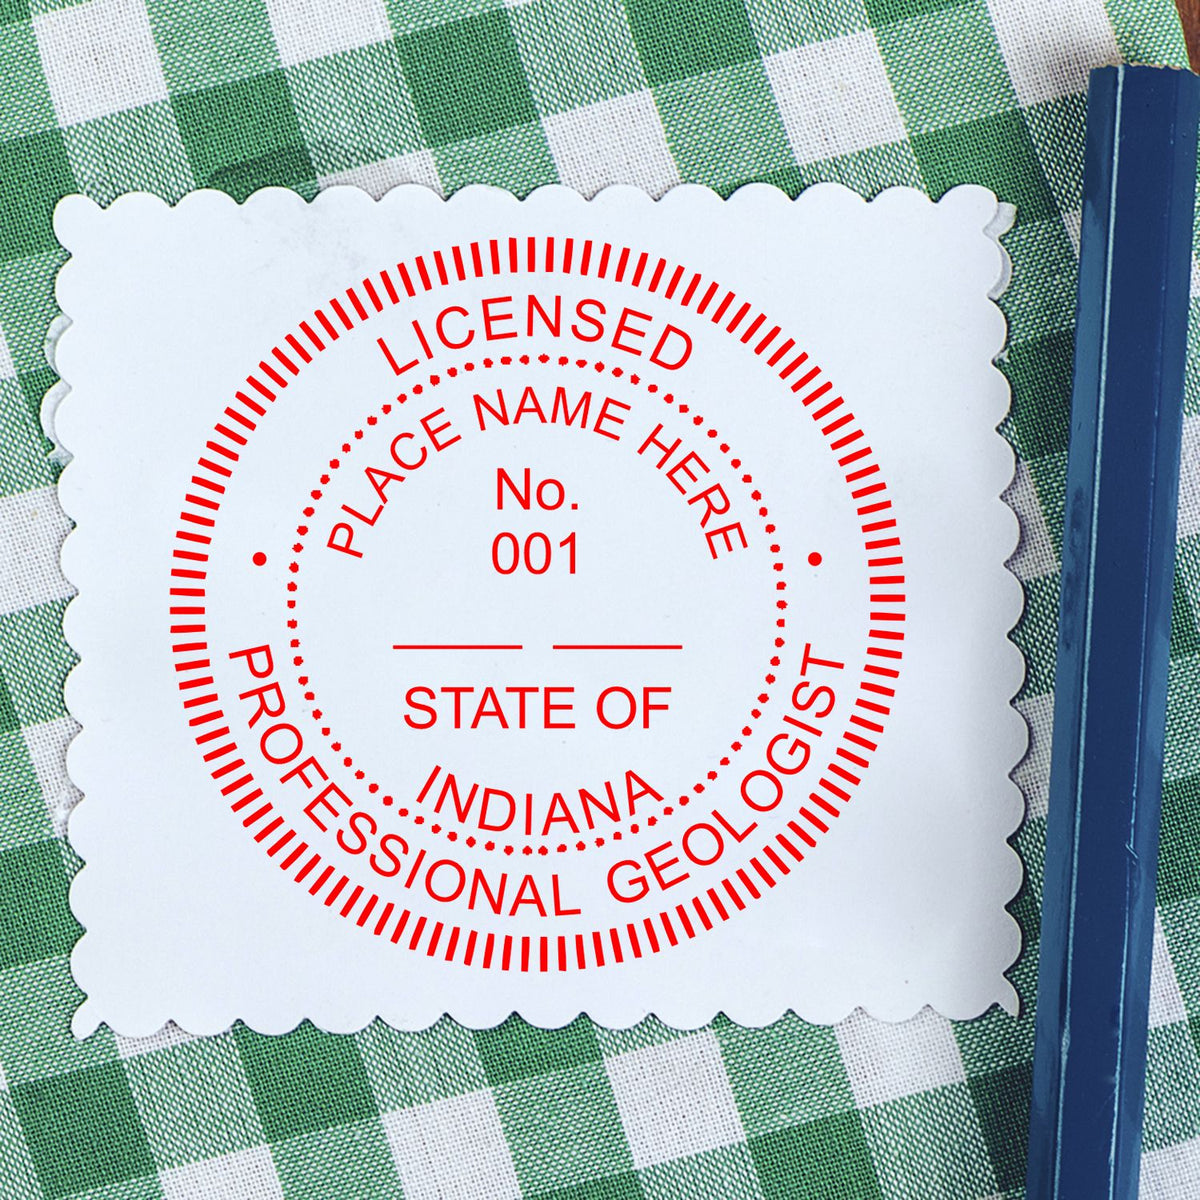 An in use photo of the Premium MaxLight Pre-Inked Indiana Geology Stamp showing a sample imprint on a cardstock